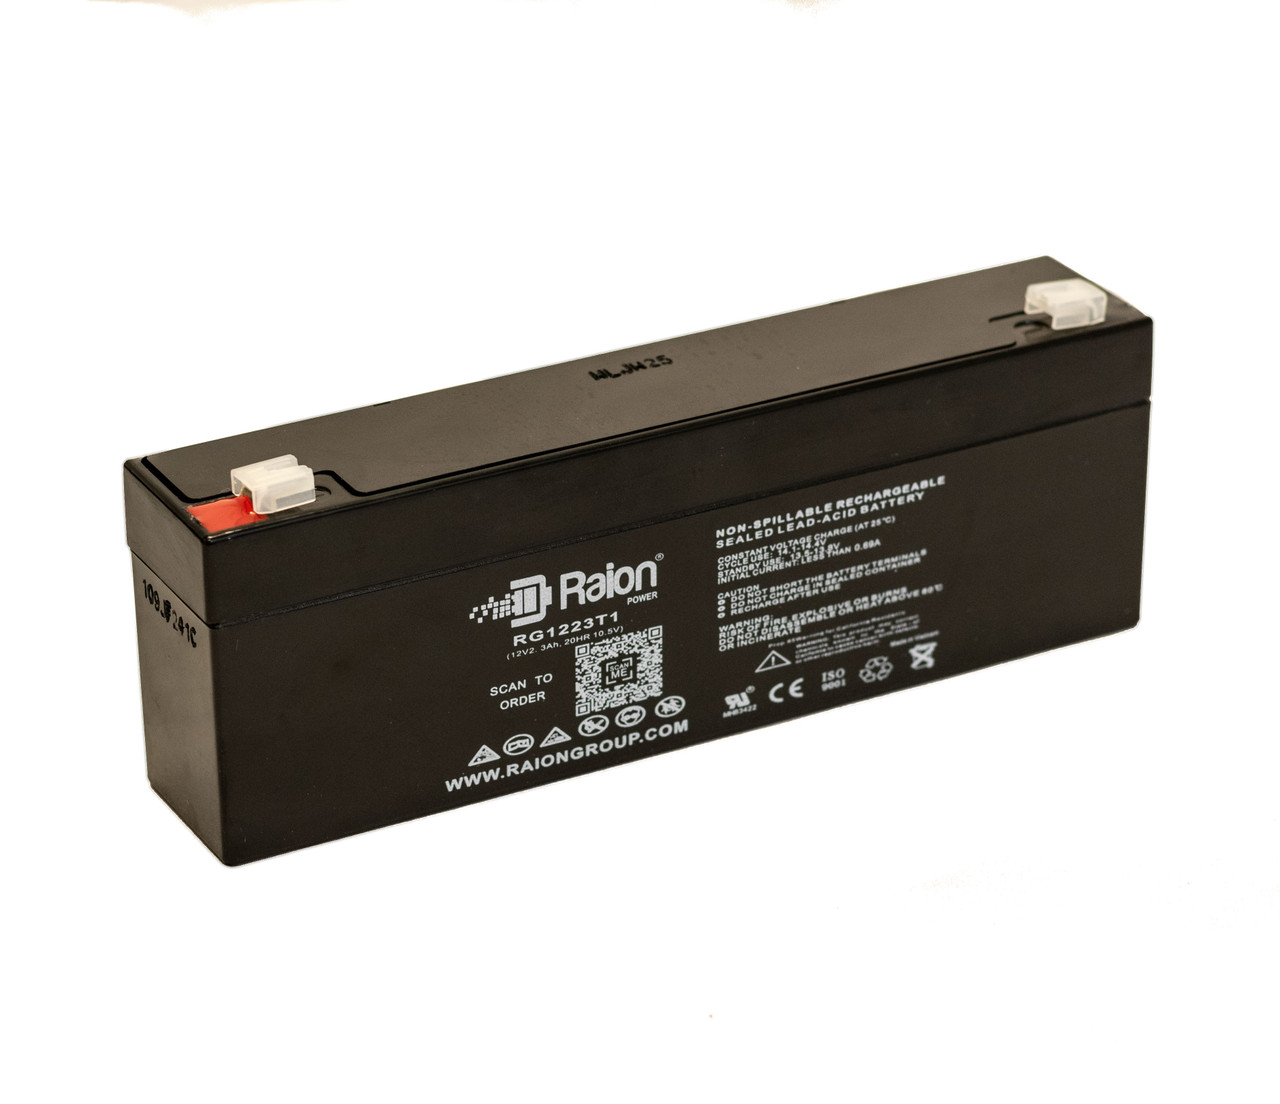 Raion Power RG1223T1 Replacement Battery for FirstPower FP1223